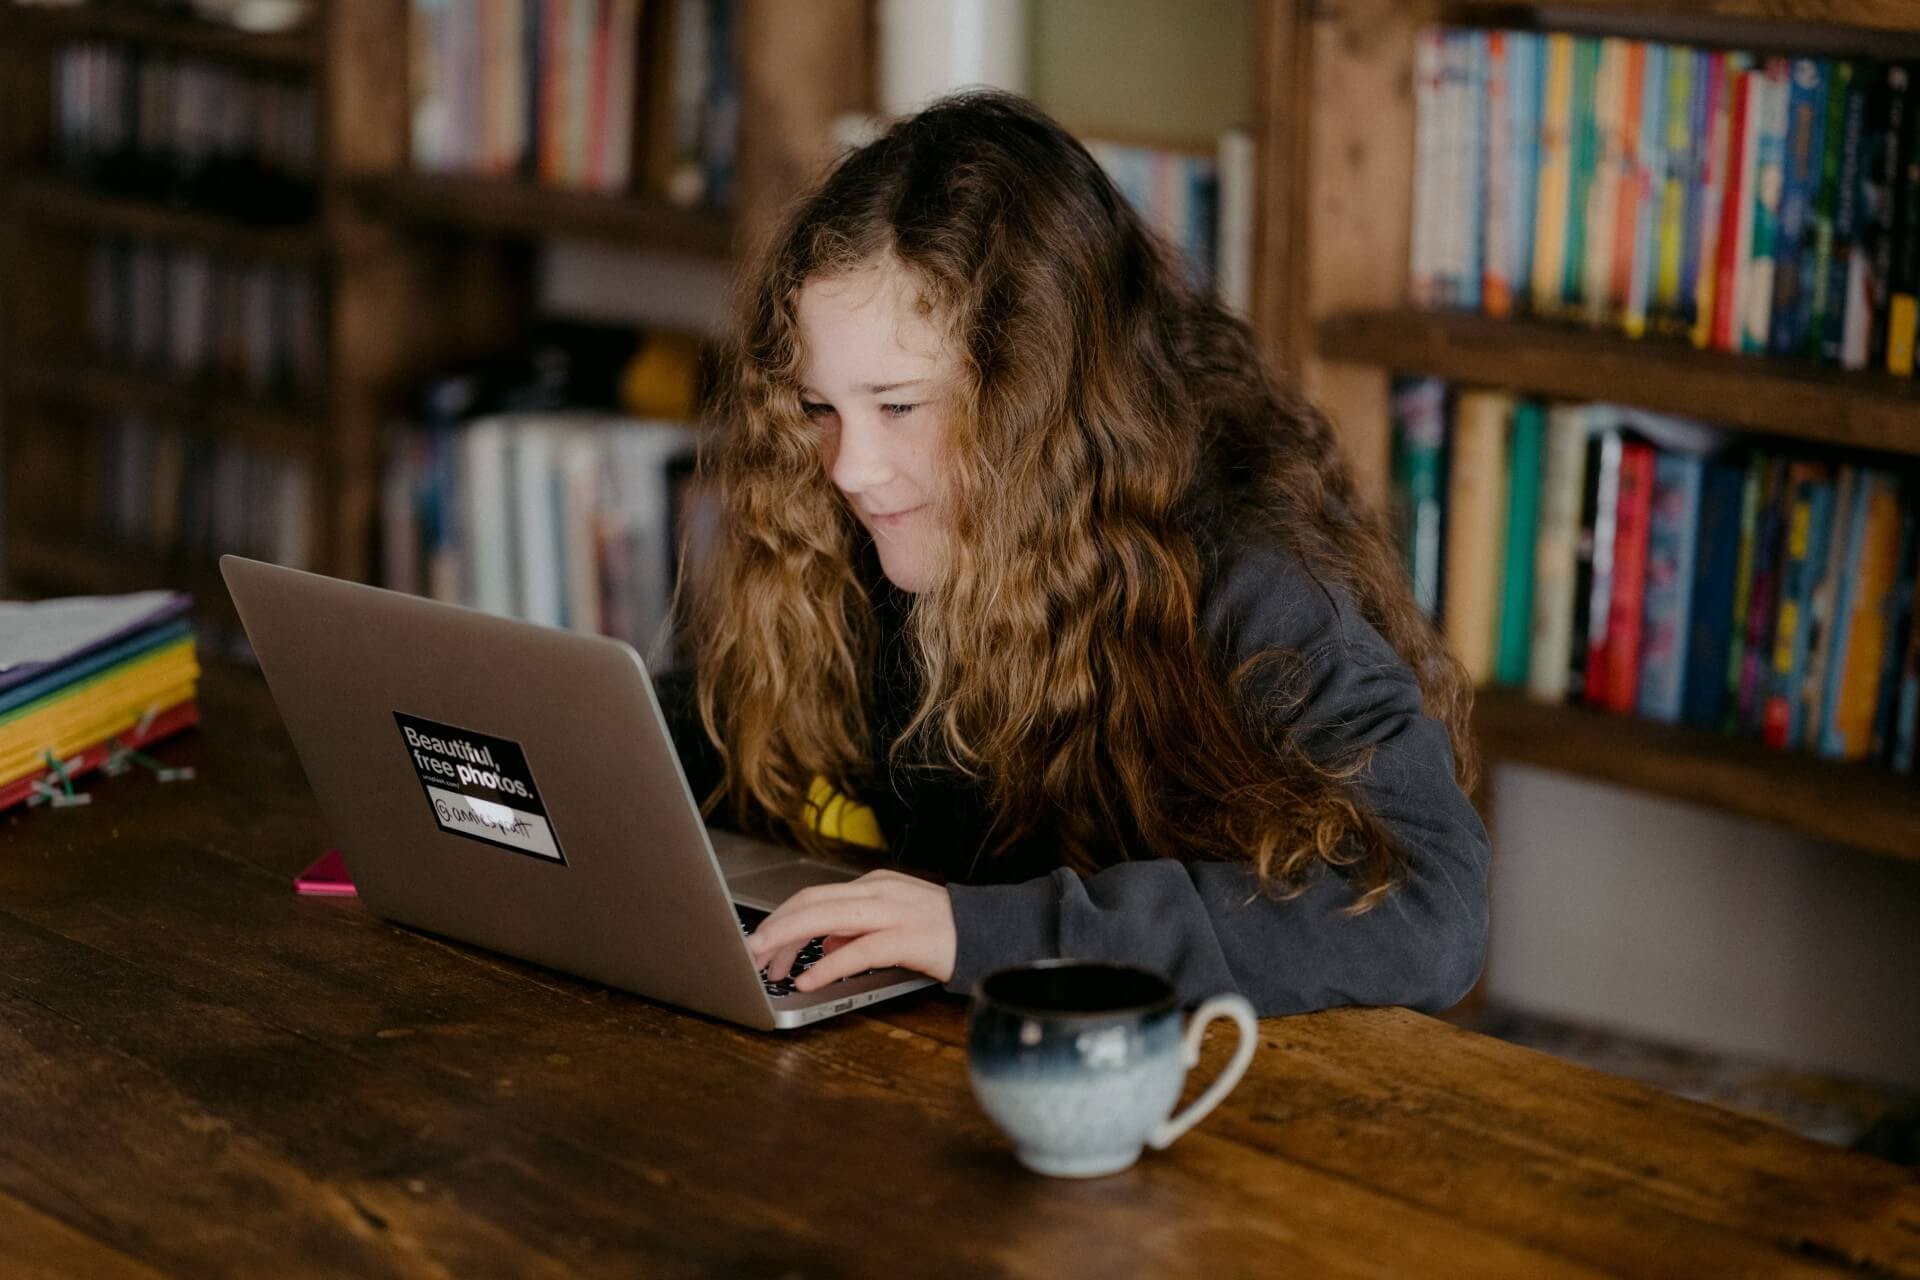 Girl at a table smiles while on a laptop.